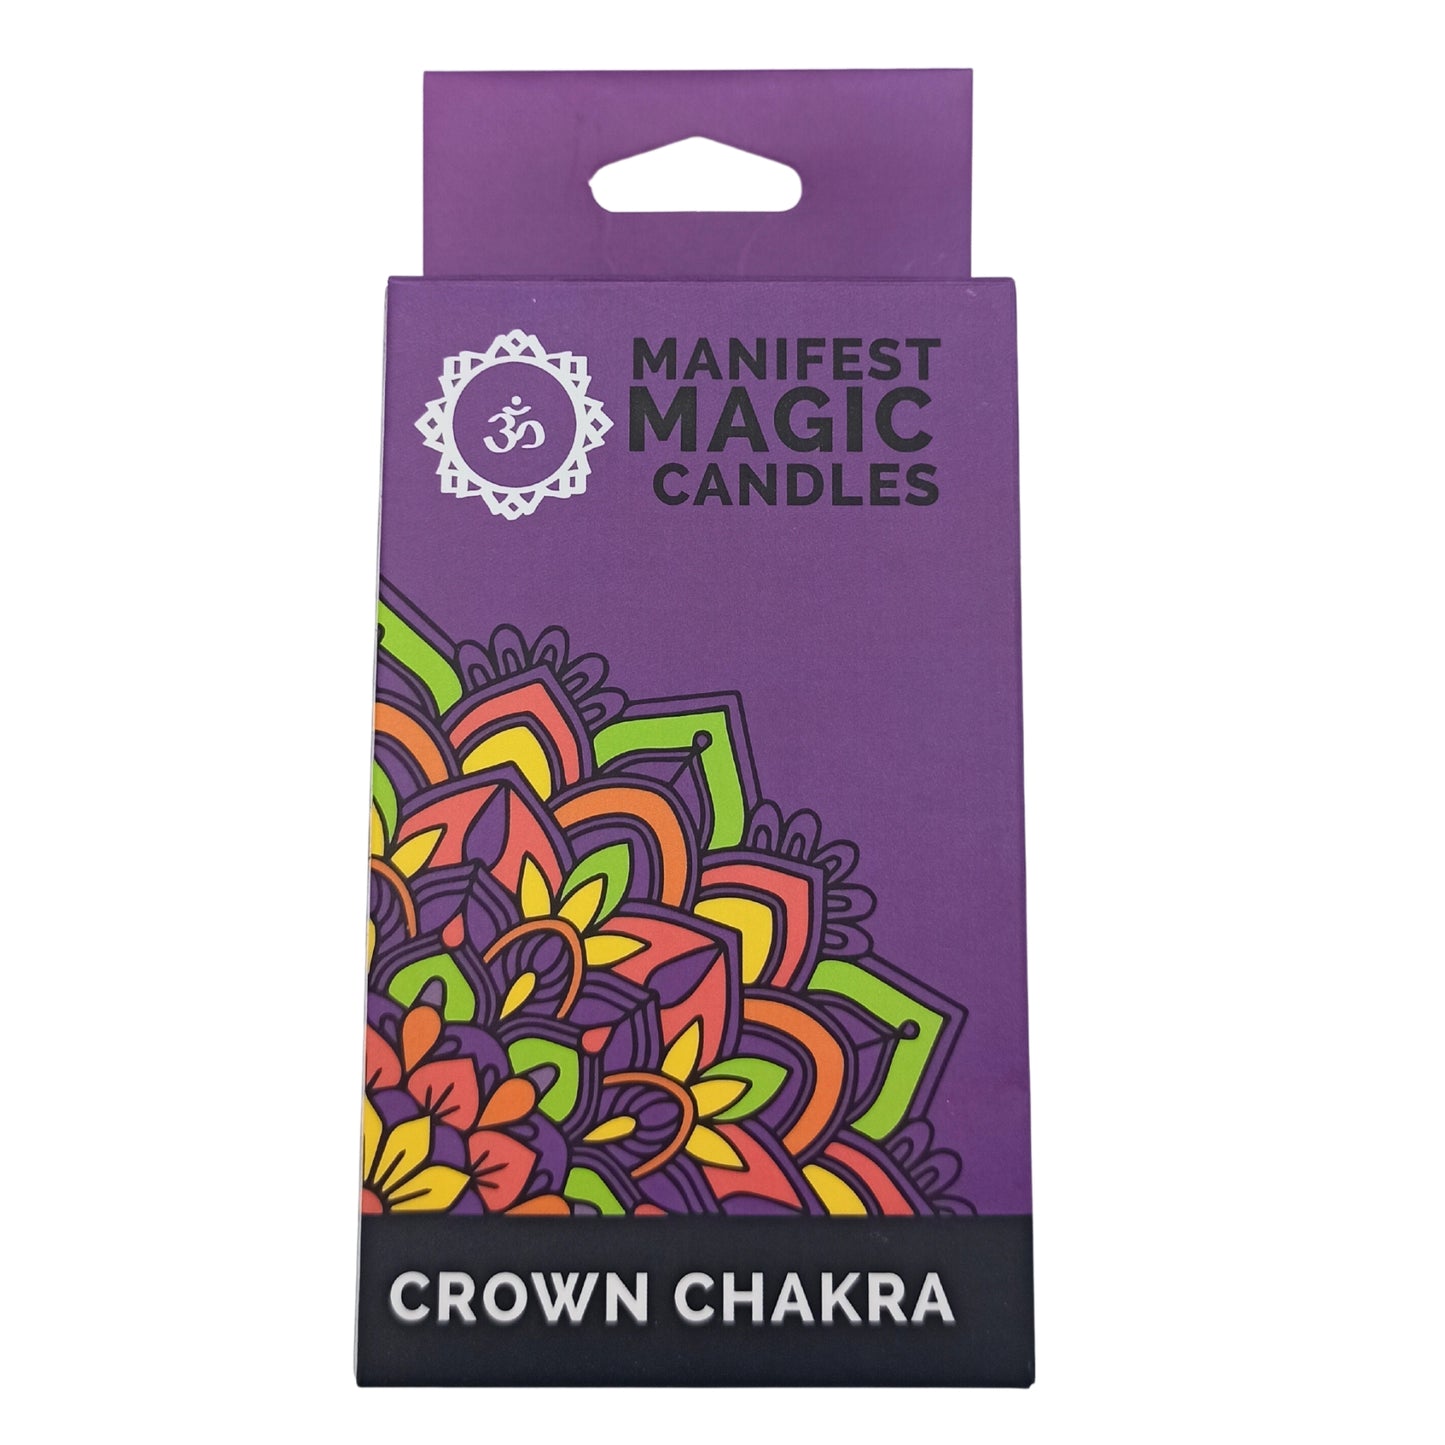 Manifest Magic Candles (pack of 12) - Violet - Crown Chakra